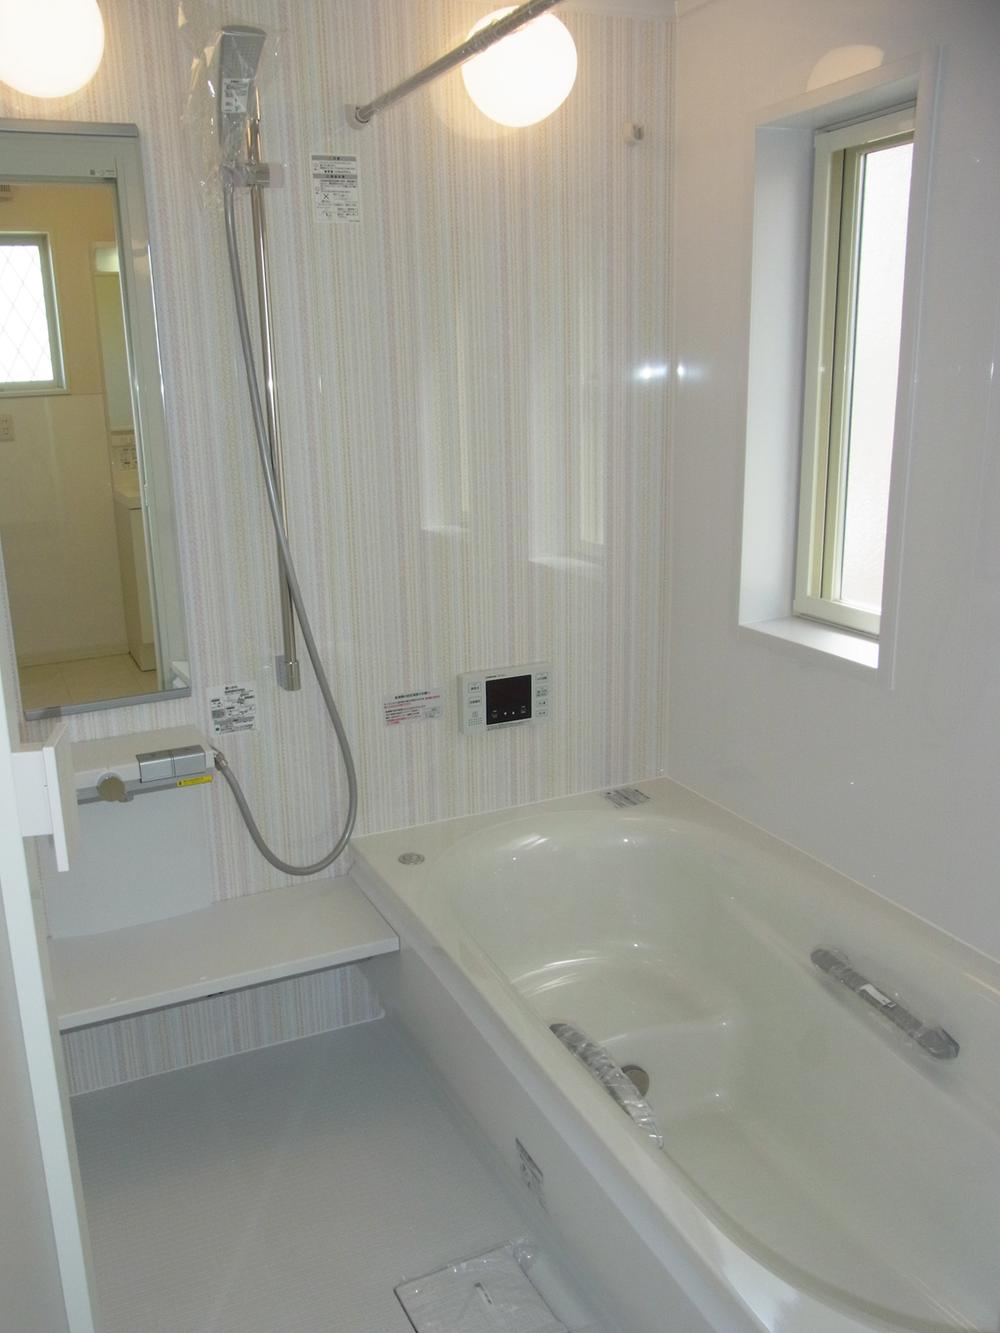 Bathroom. Construction example: a bath with cleanliness Is changed freely the height of the shower It has become a mounting.